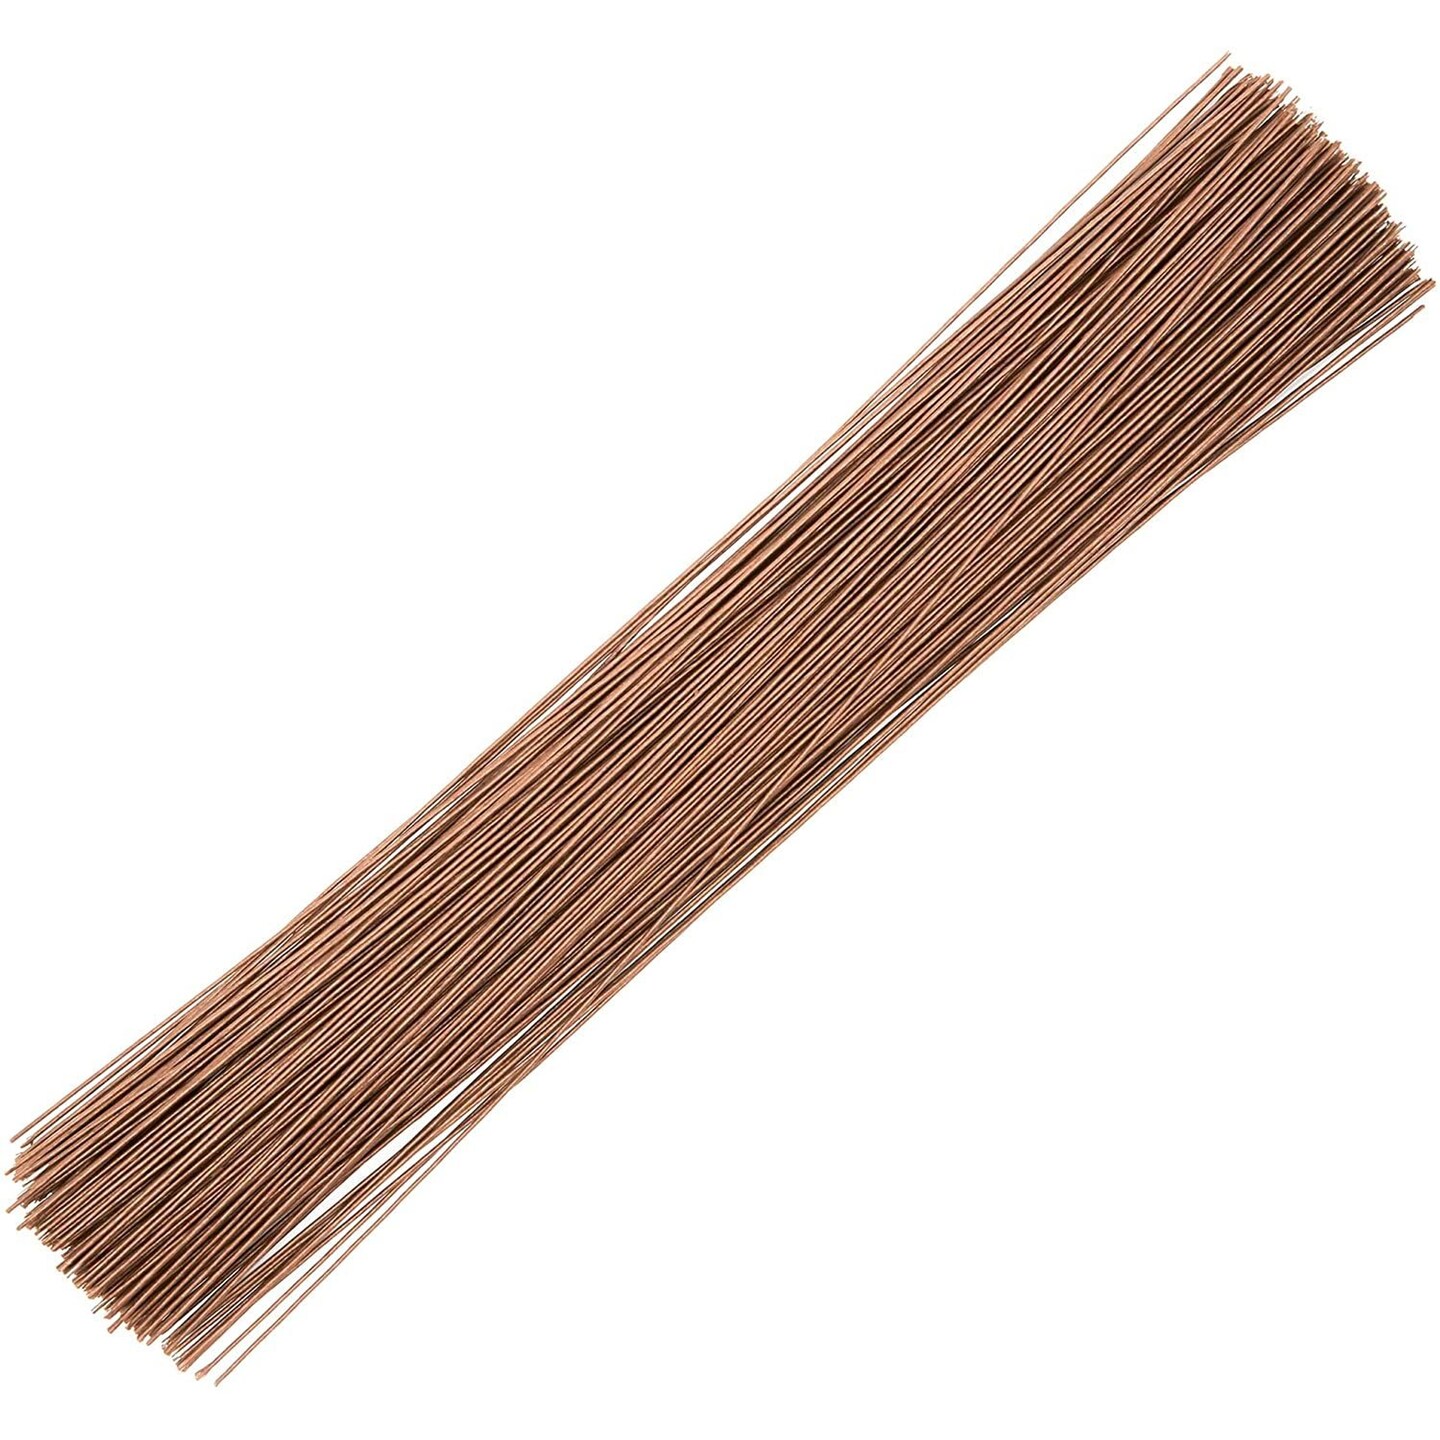 240 Count Brown 18 Gauge Floral Wire Stems for Artificial Flower  Arrangements, Wreath Making, Wedding Decorations (16 Inches)